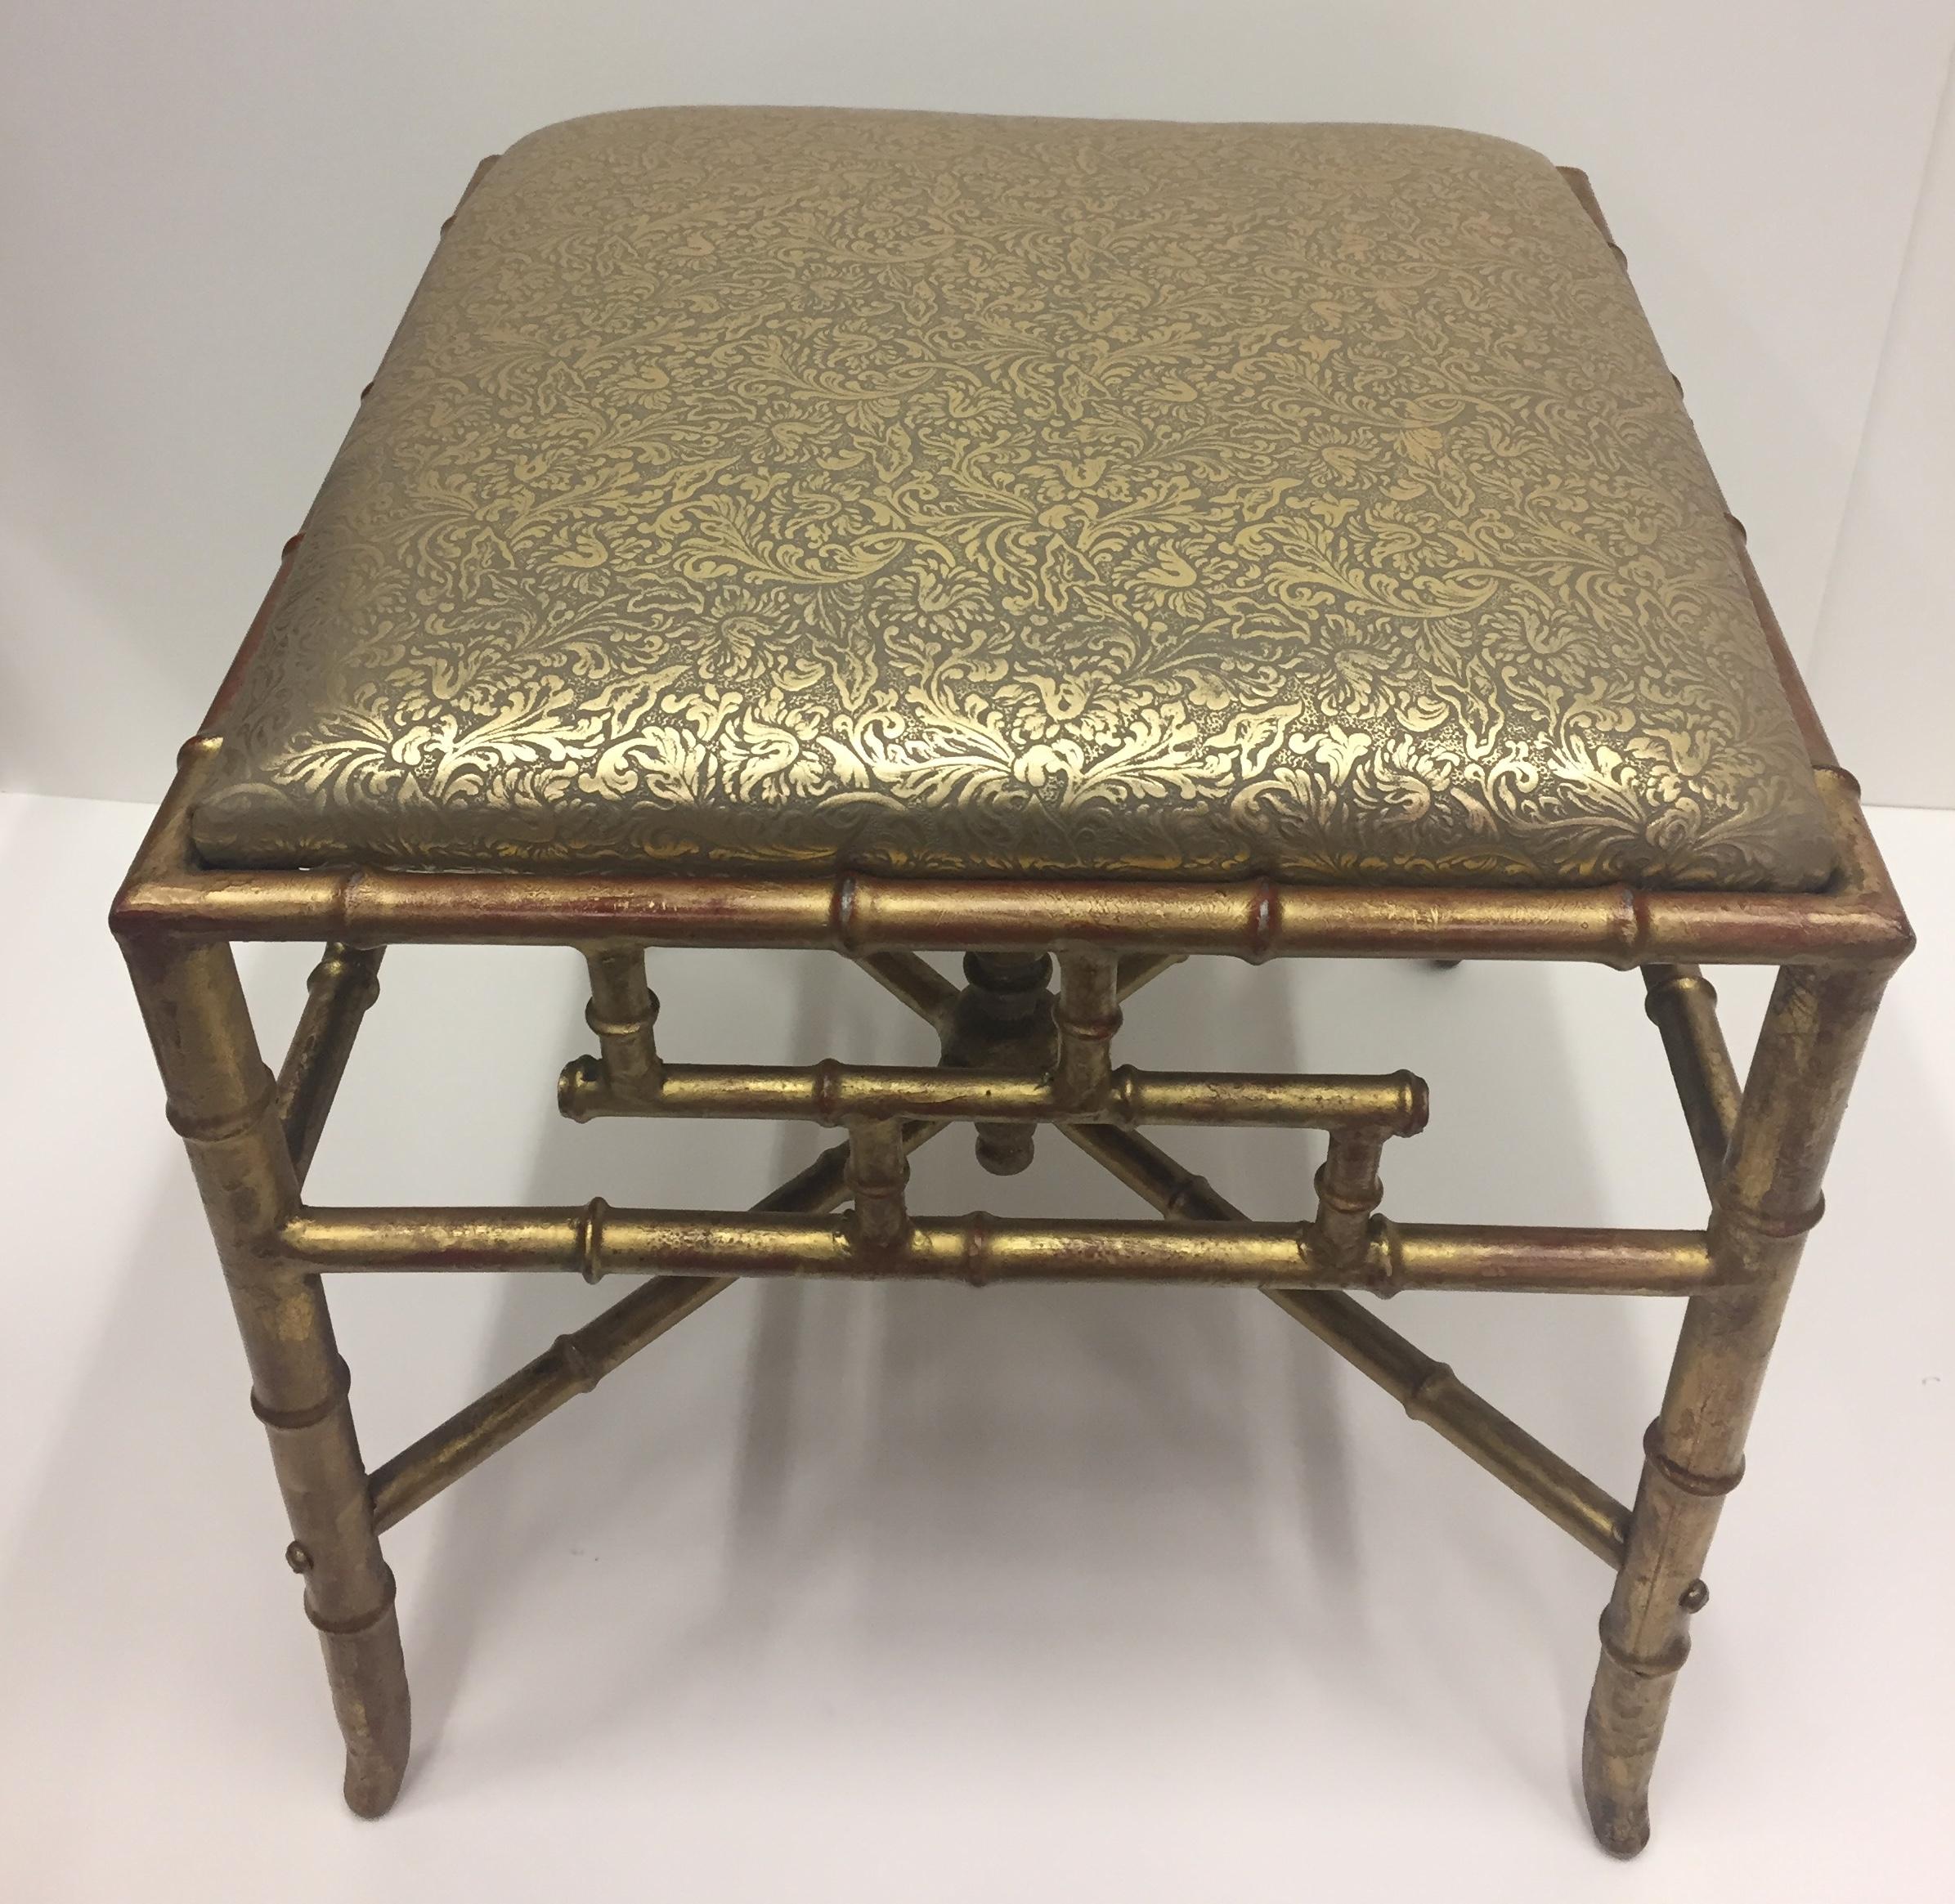 A glitzy and elegant Italian gilded iron ottoman bench having subtle red underpaint on its faux bamboo base and gorgeous new Florentine style embossed gold leather upholstery.
 